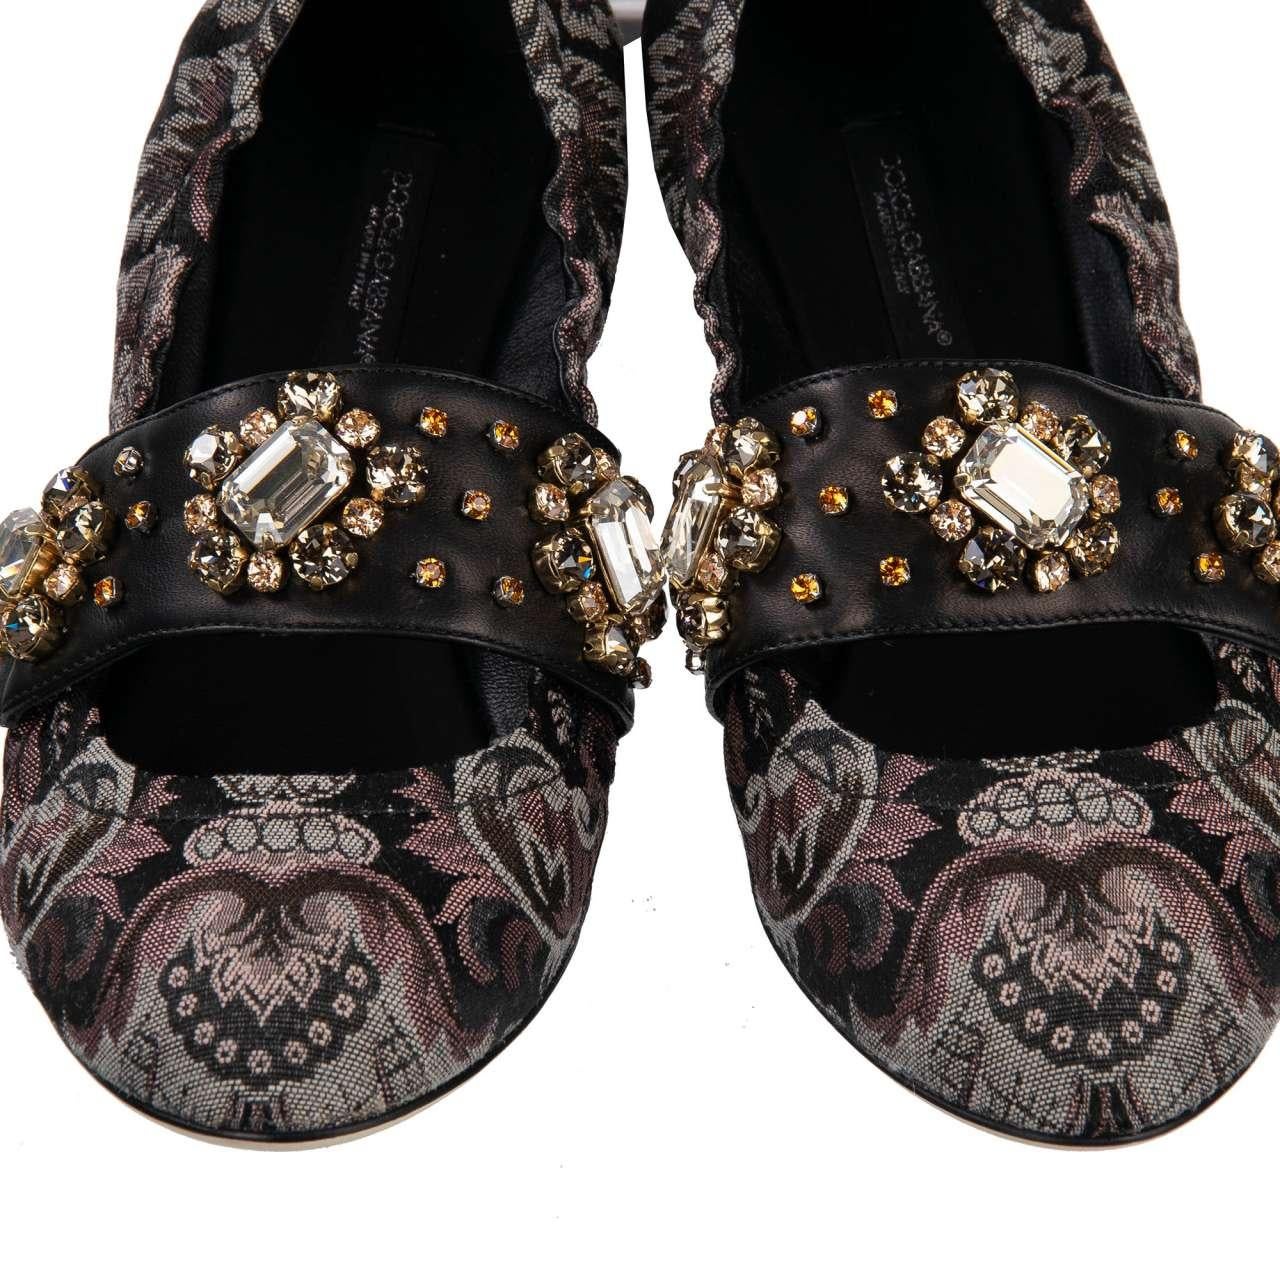 Women's Dolce & Gabbana - Brocade Ballet Flats VALLY with Crystals 38.5 For Sale